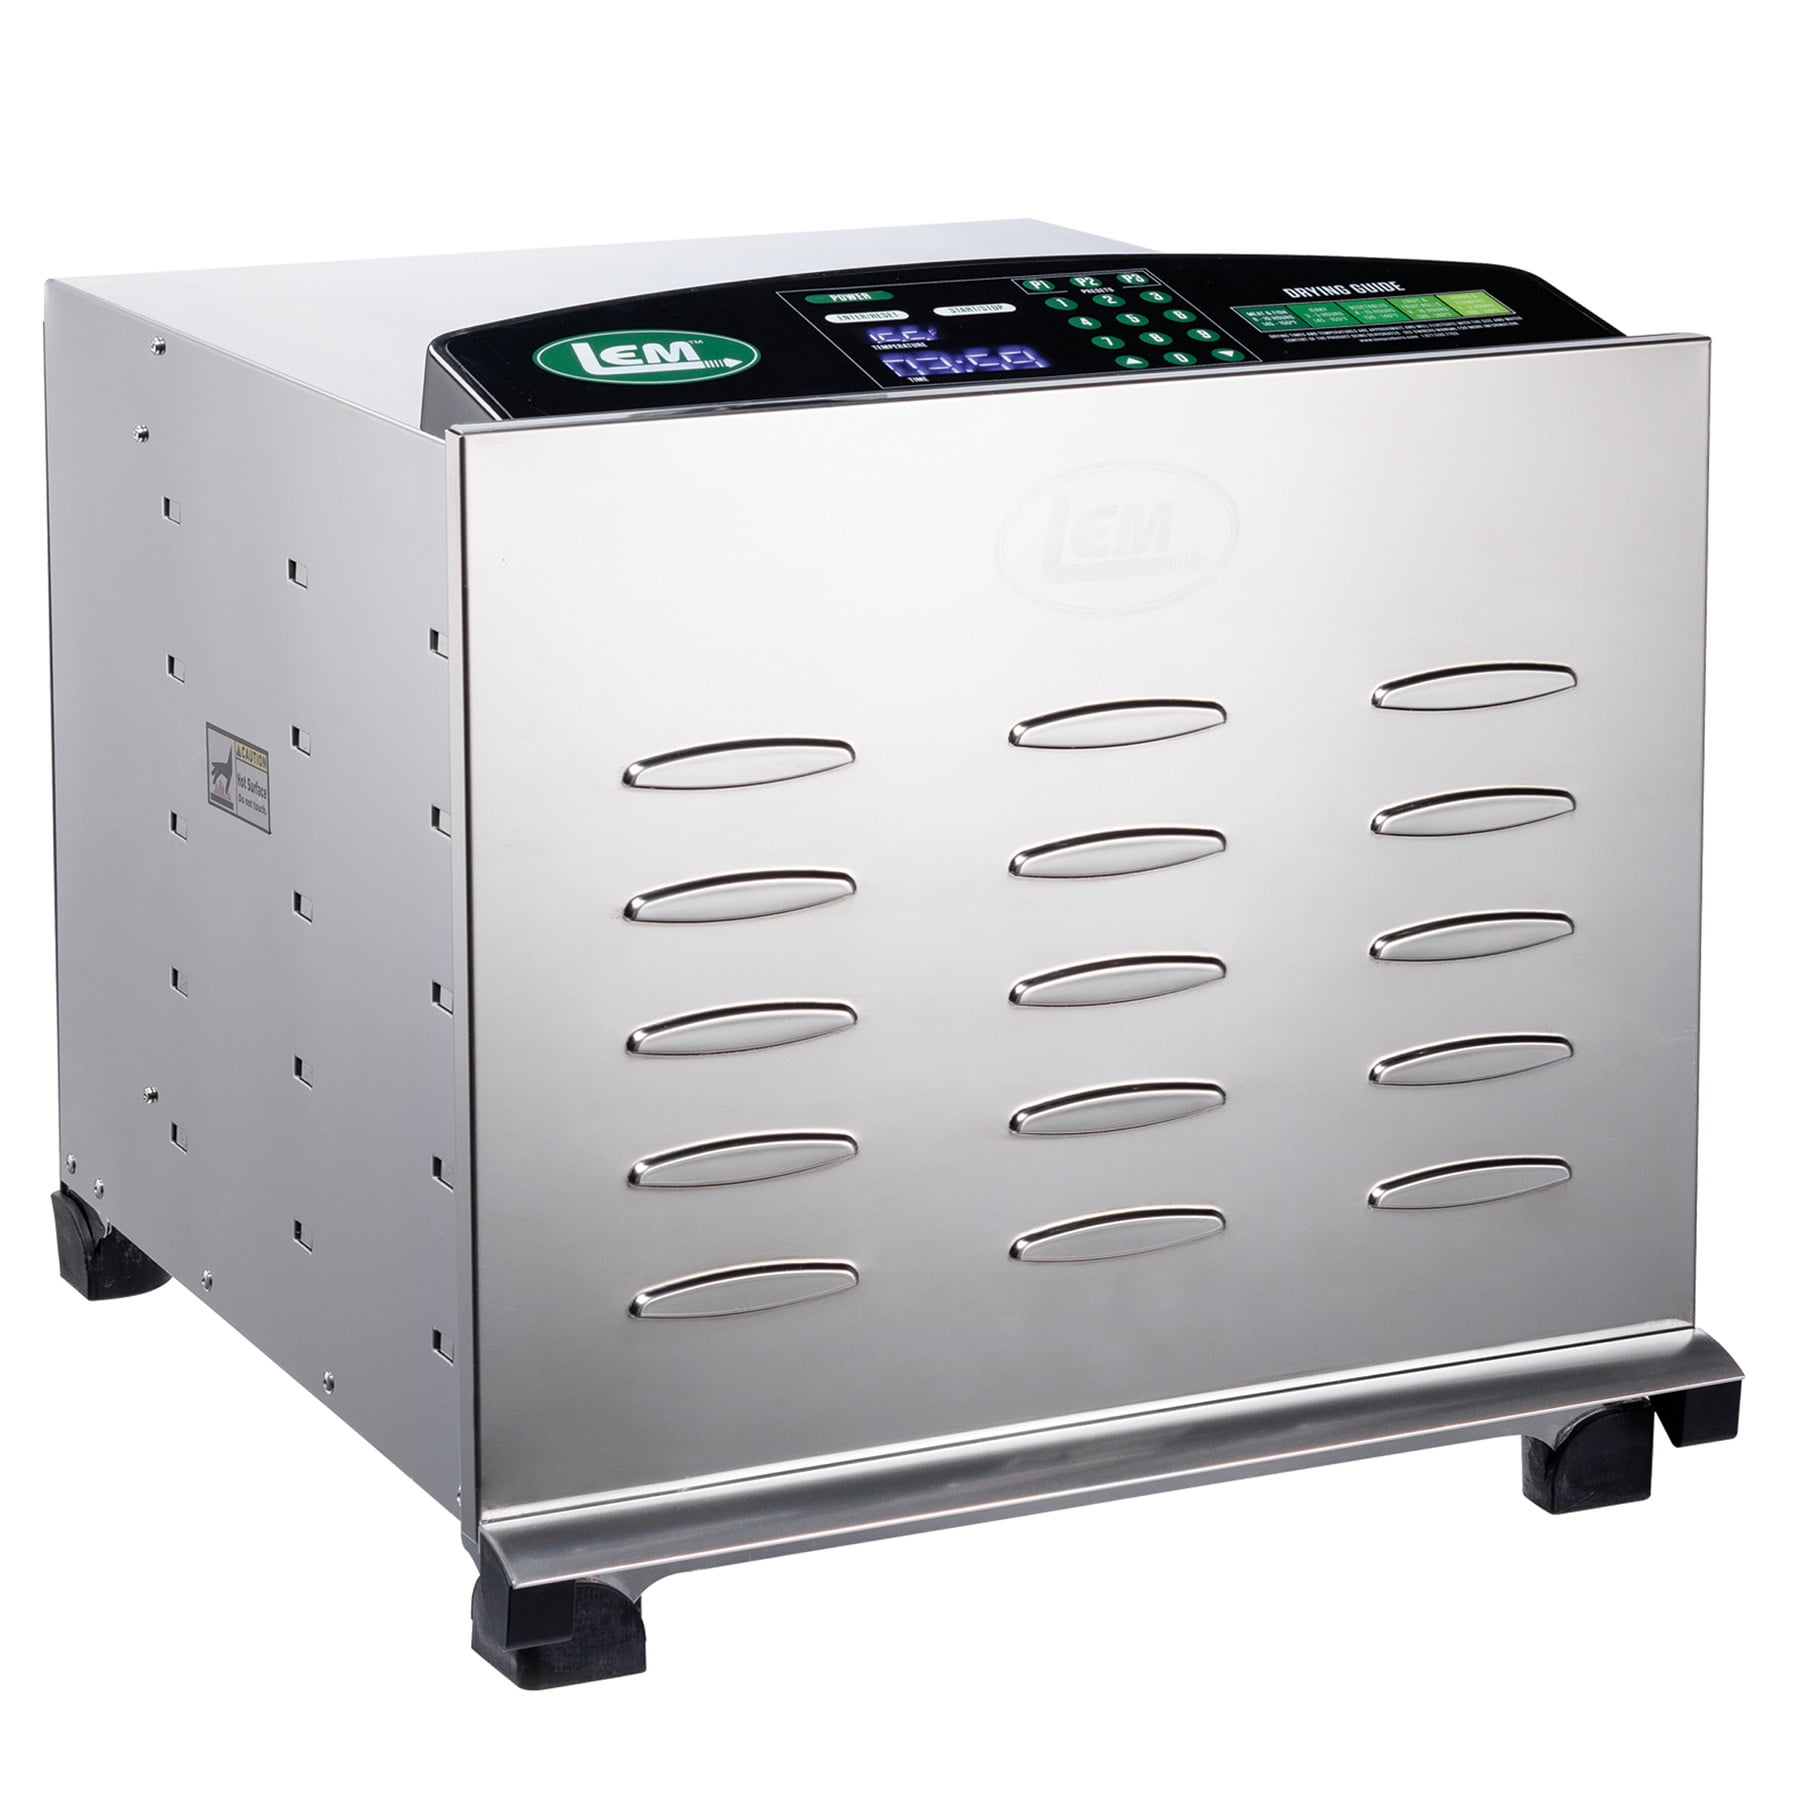 Stainless Steel Commercial Electric Food Dryer Machine Candy For Fruit And  Dehydration LLFA196M From Gbbhg, $392.49